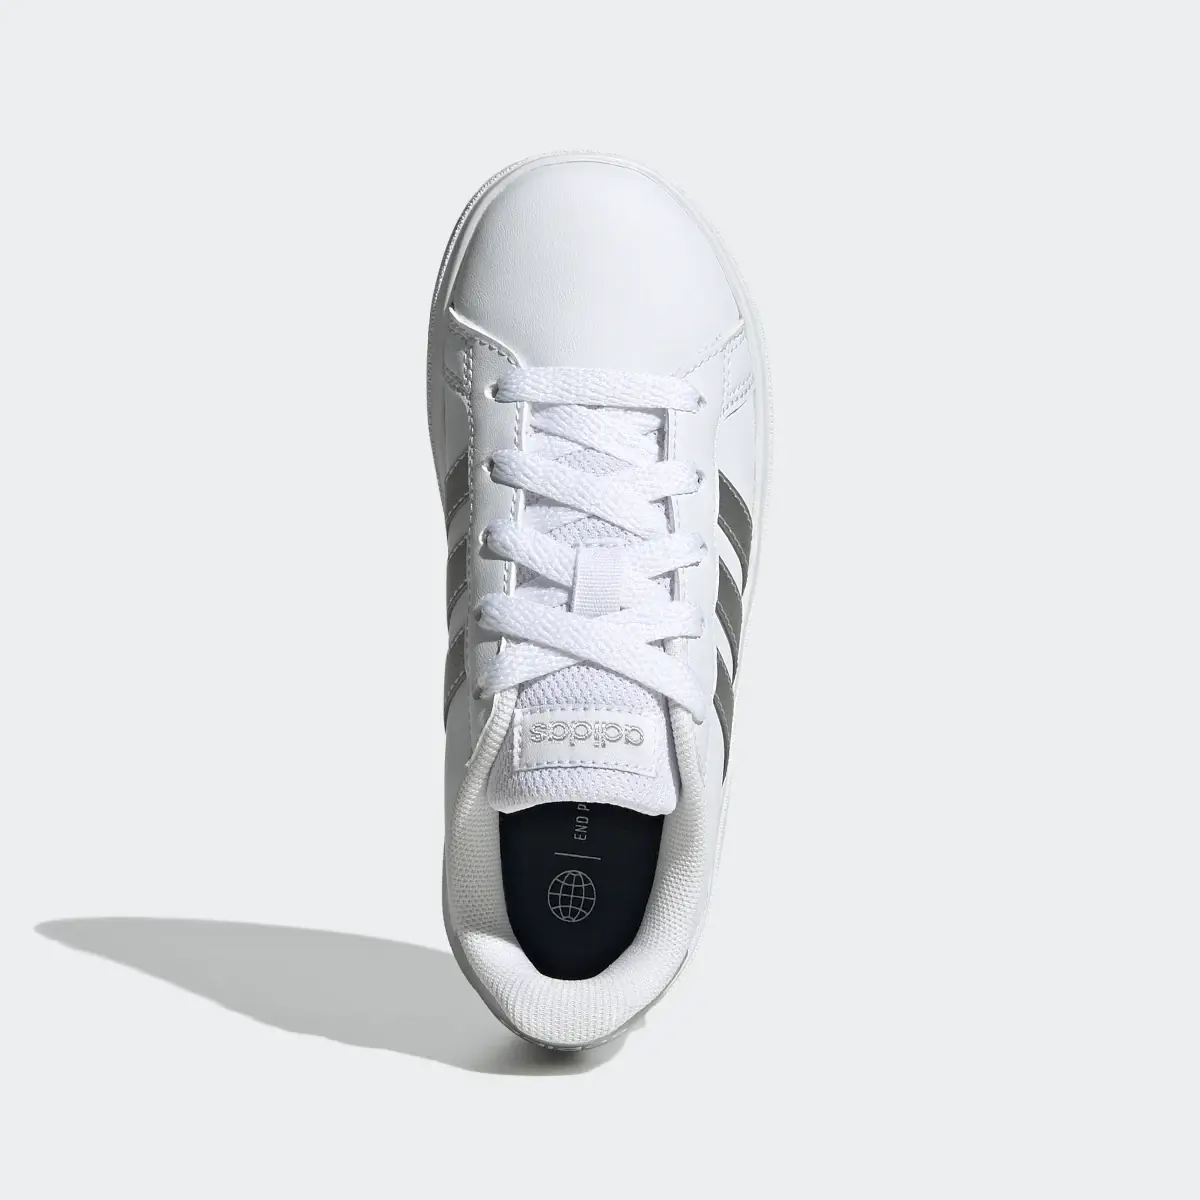 Adidas Grand Court Lifestyle Tennis Lace-Up Shoes. 3